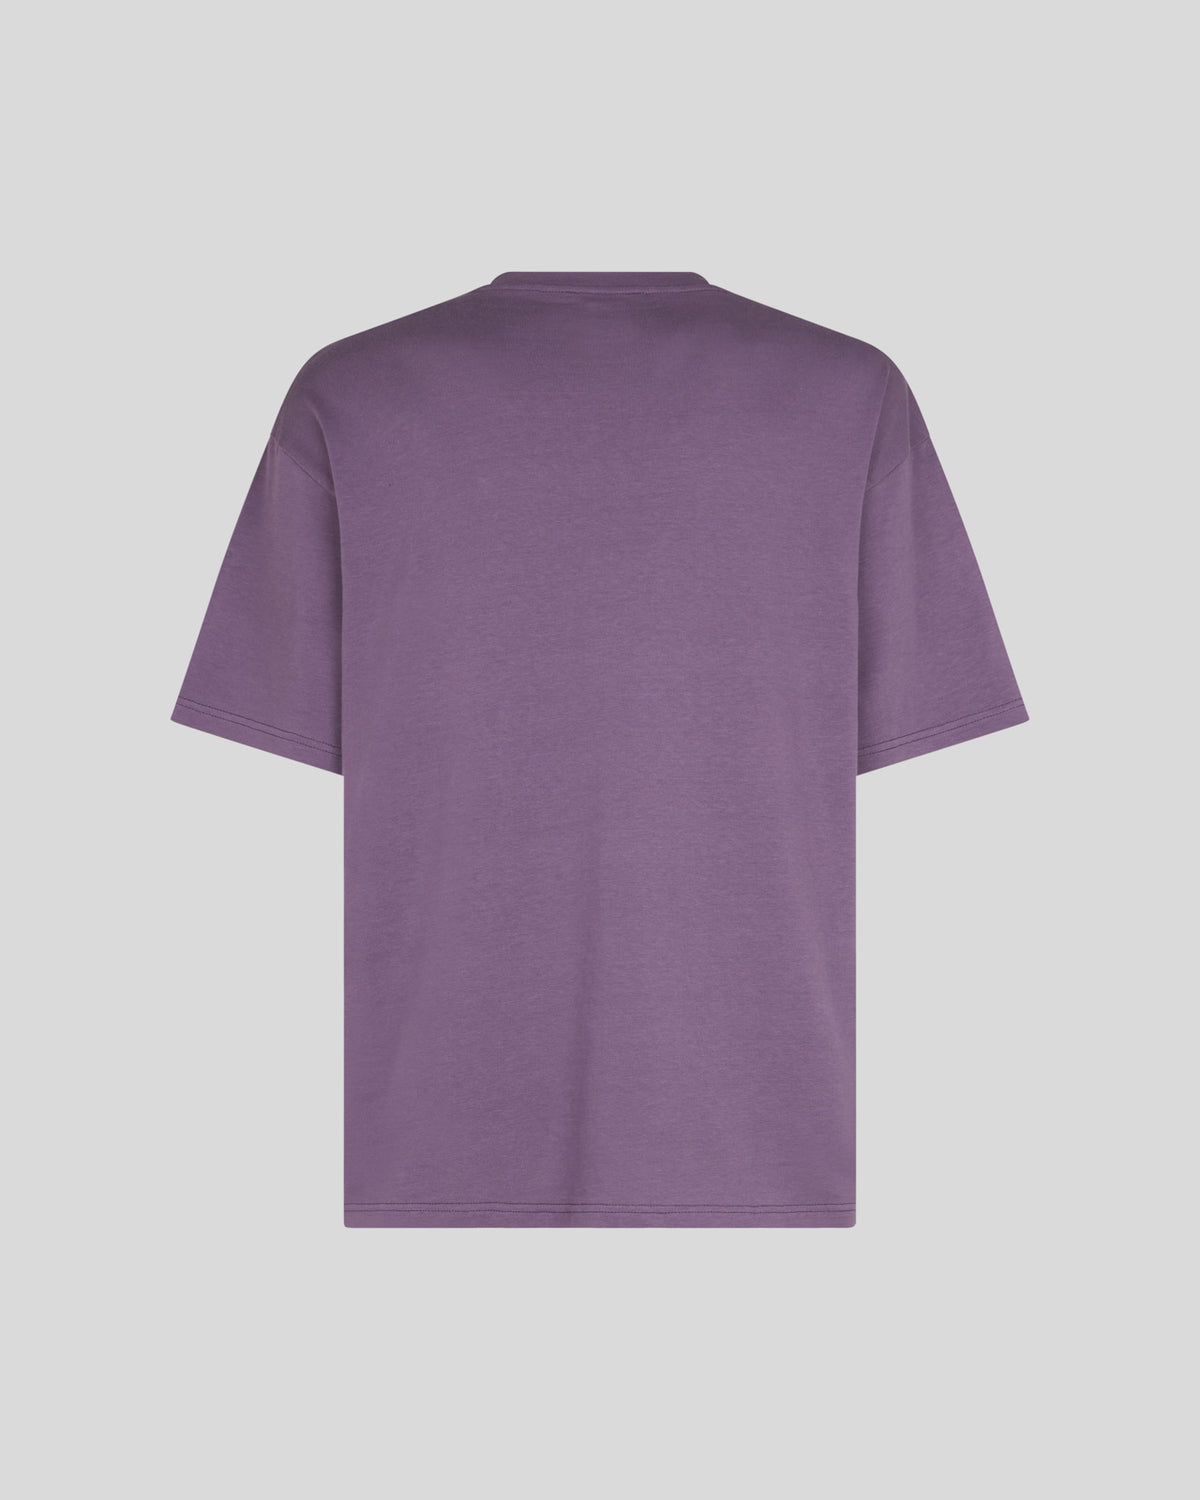 PHOBIA BLUE T-SHIRT WITH PURPLE EMBROIDERY LIGHTNING